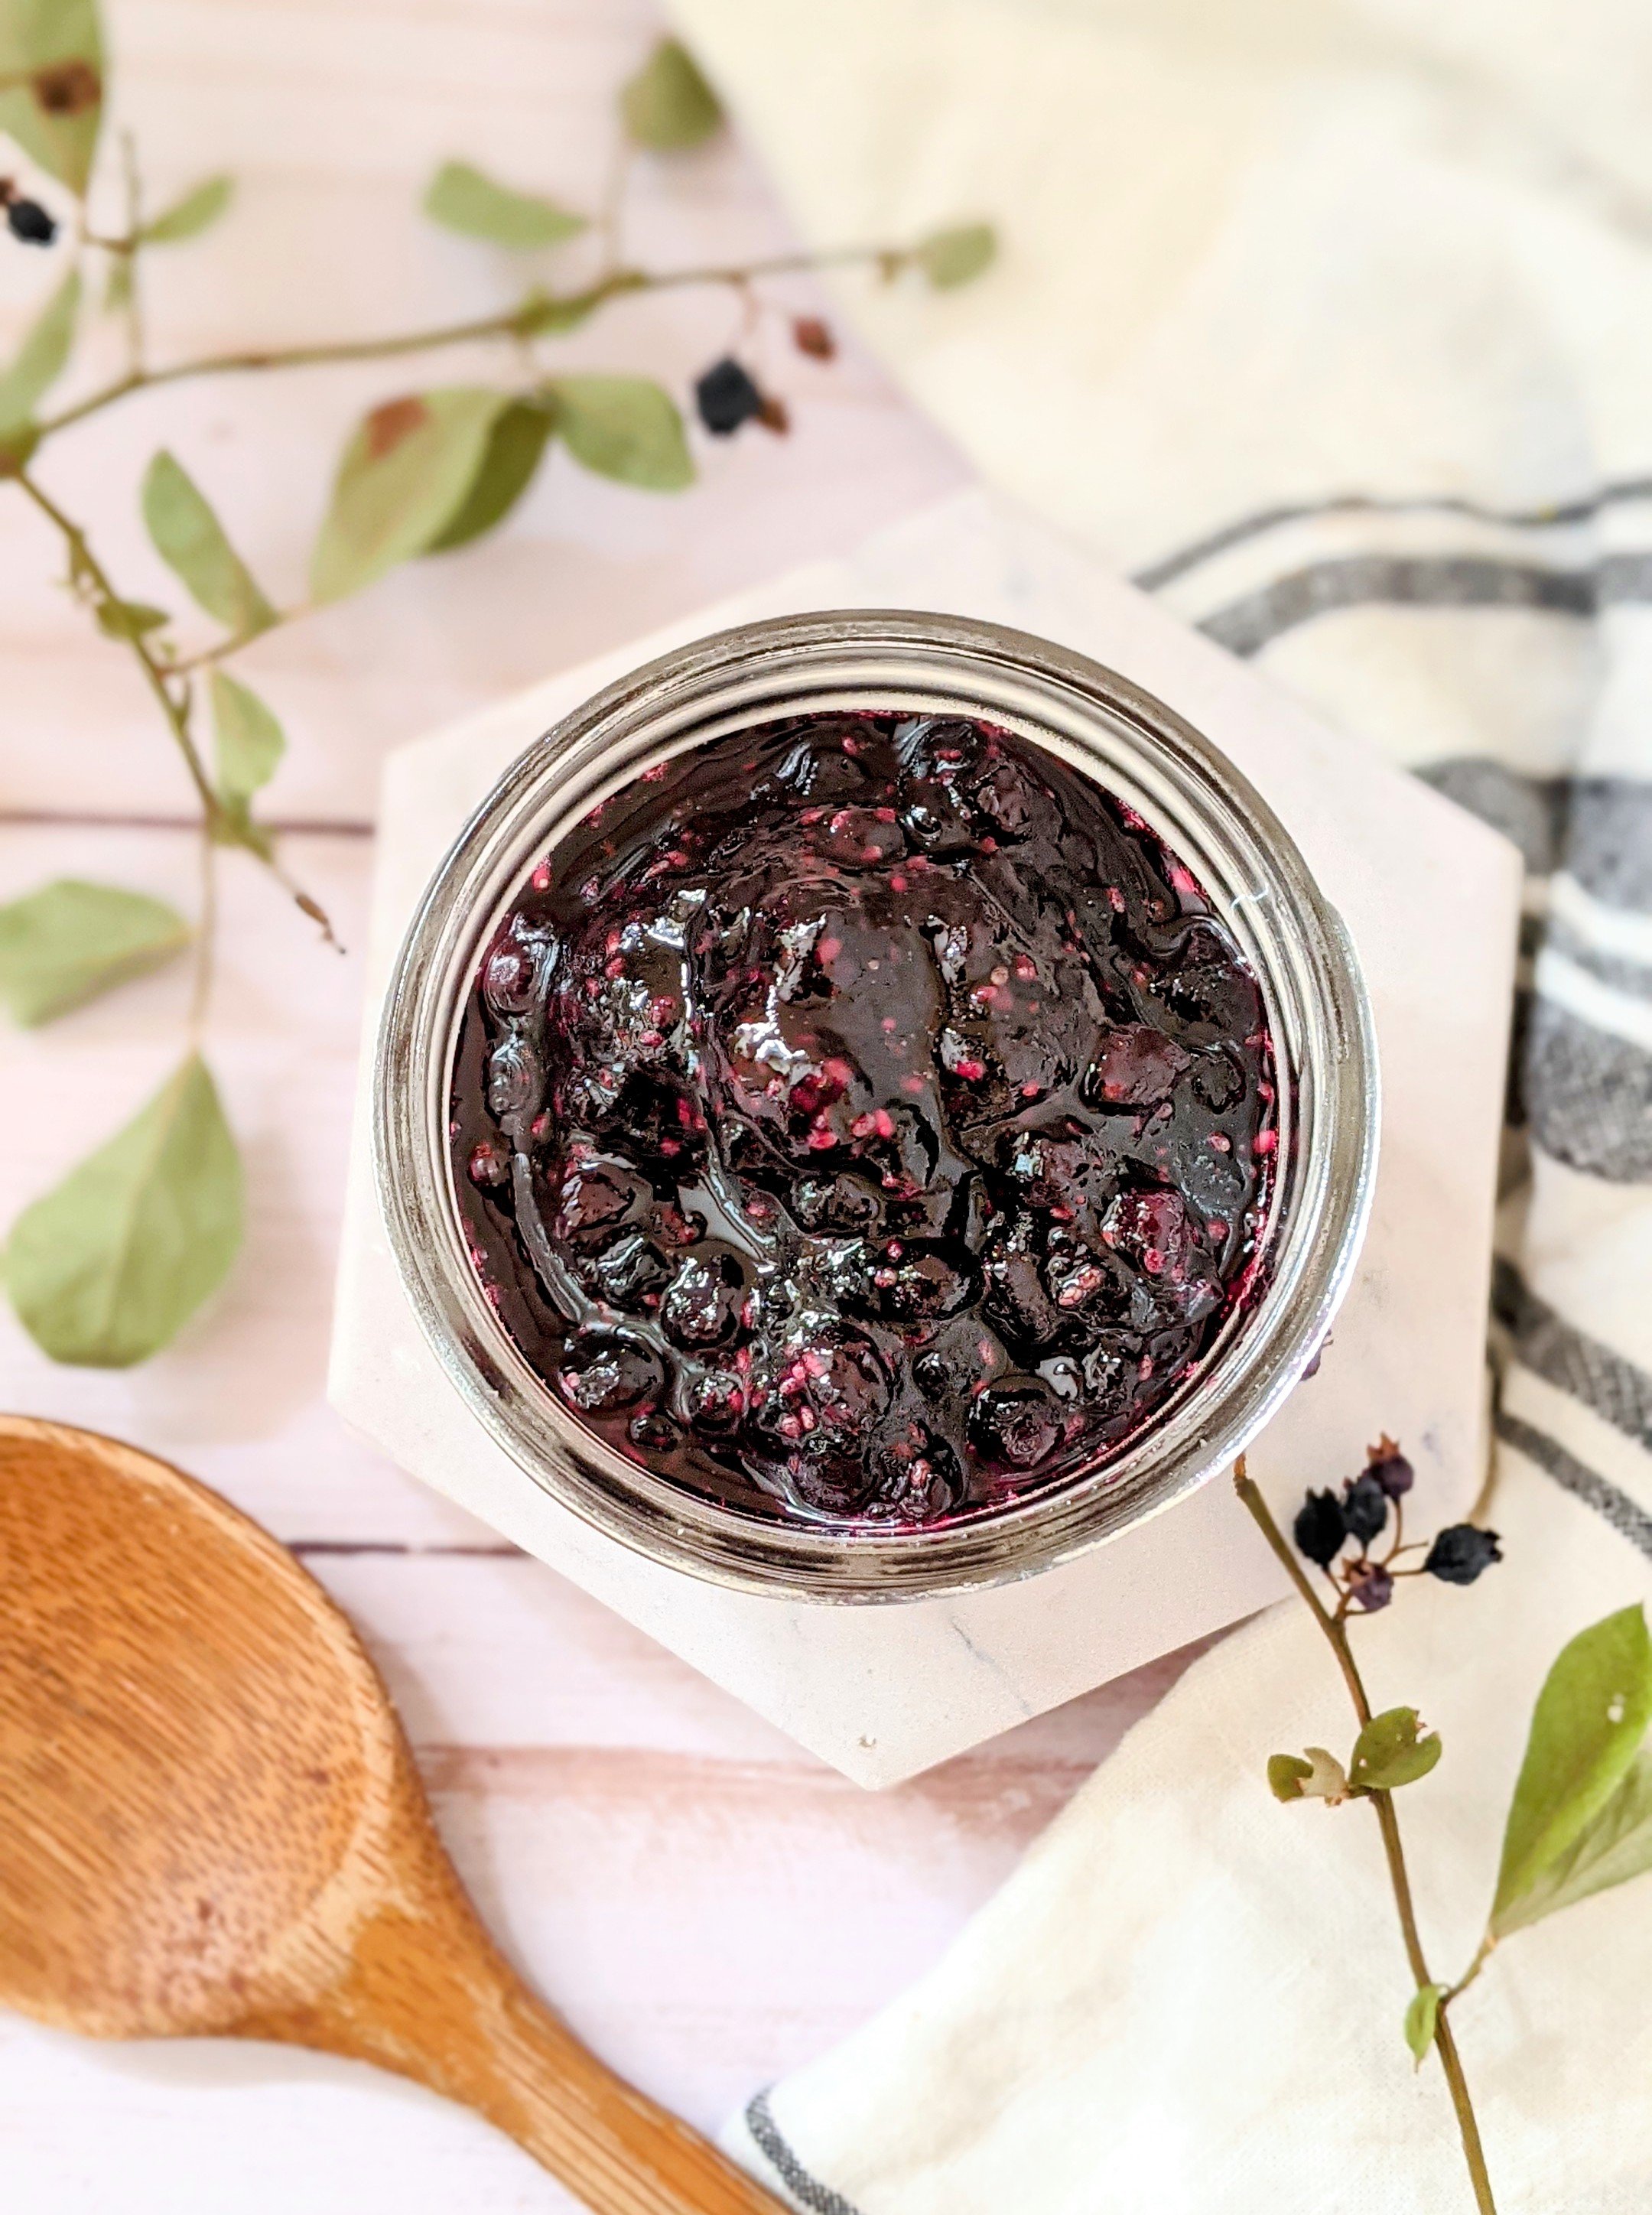 huckleberry jam recipe with chia seeds recipes for fresh huckleberry jelly and jam without pectin vegan gluten free fresh huckleberry recipes for summer easy jam with huckleberries